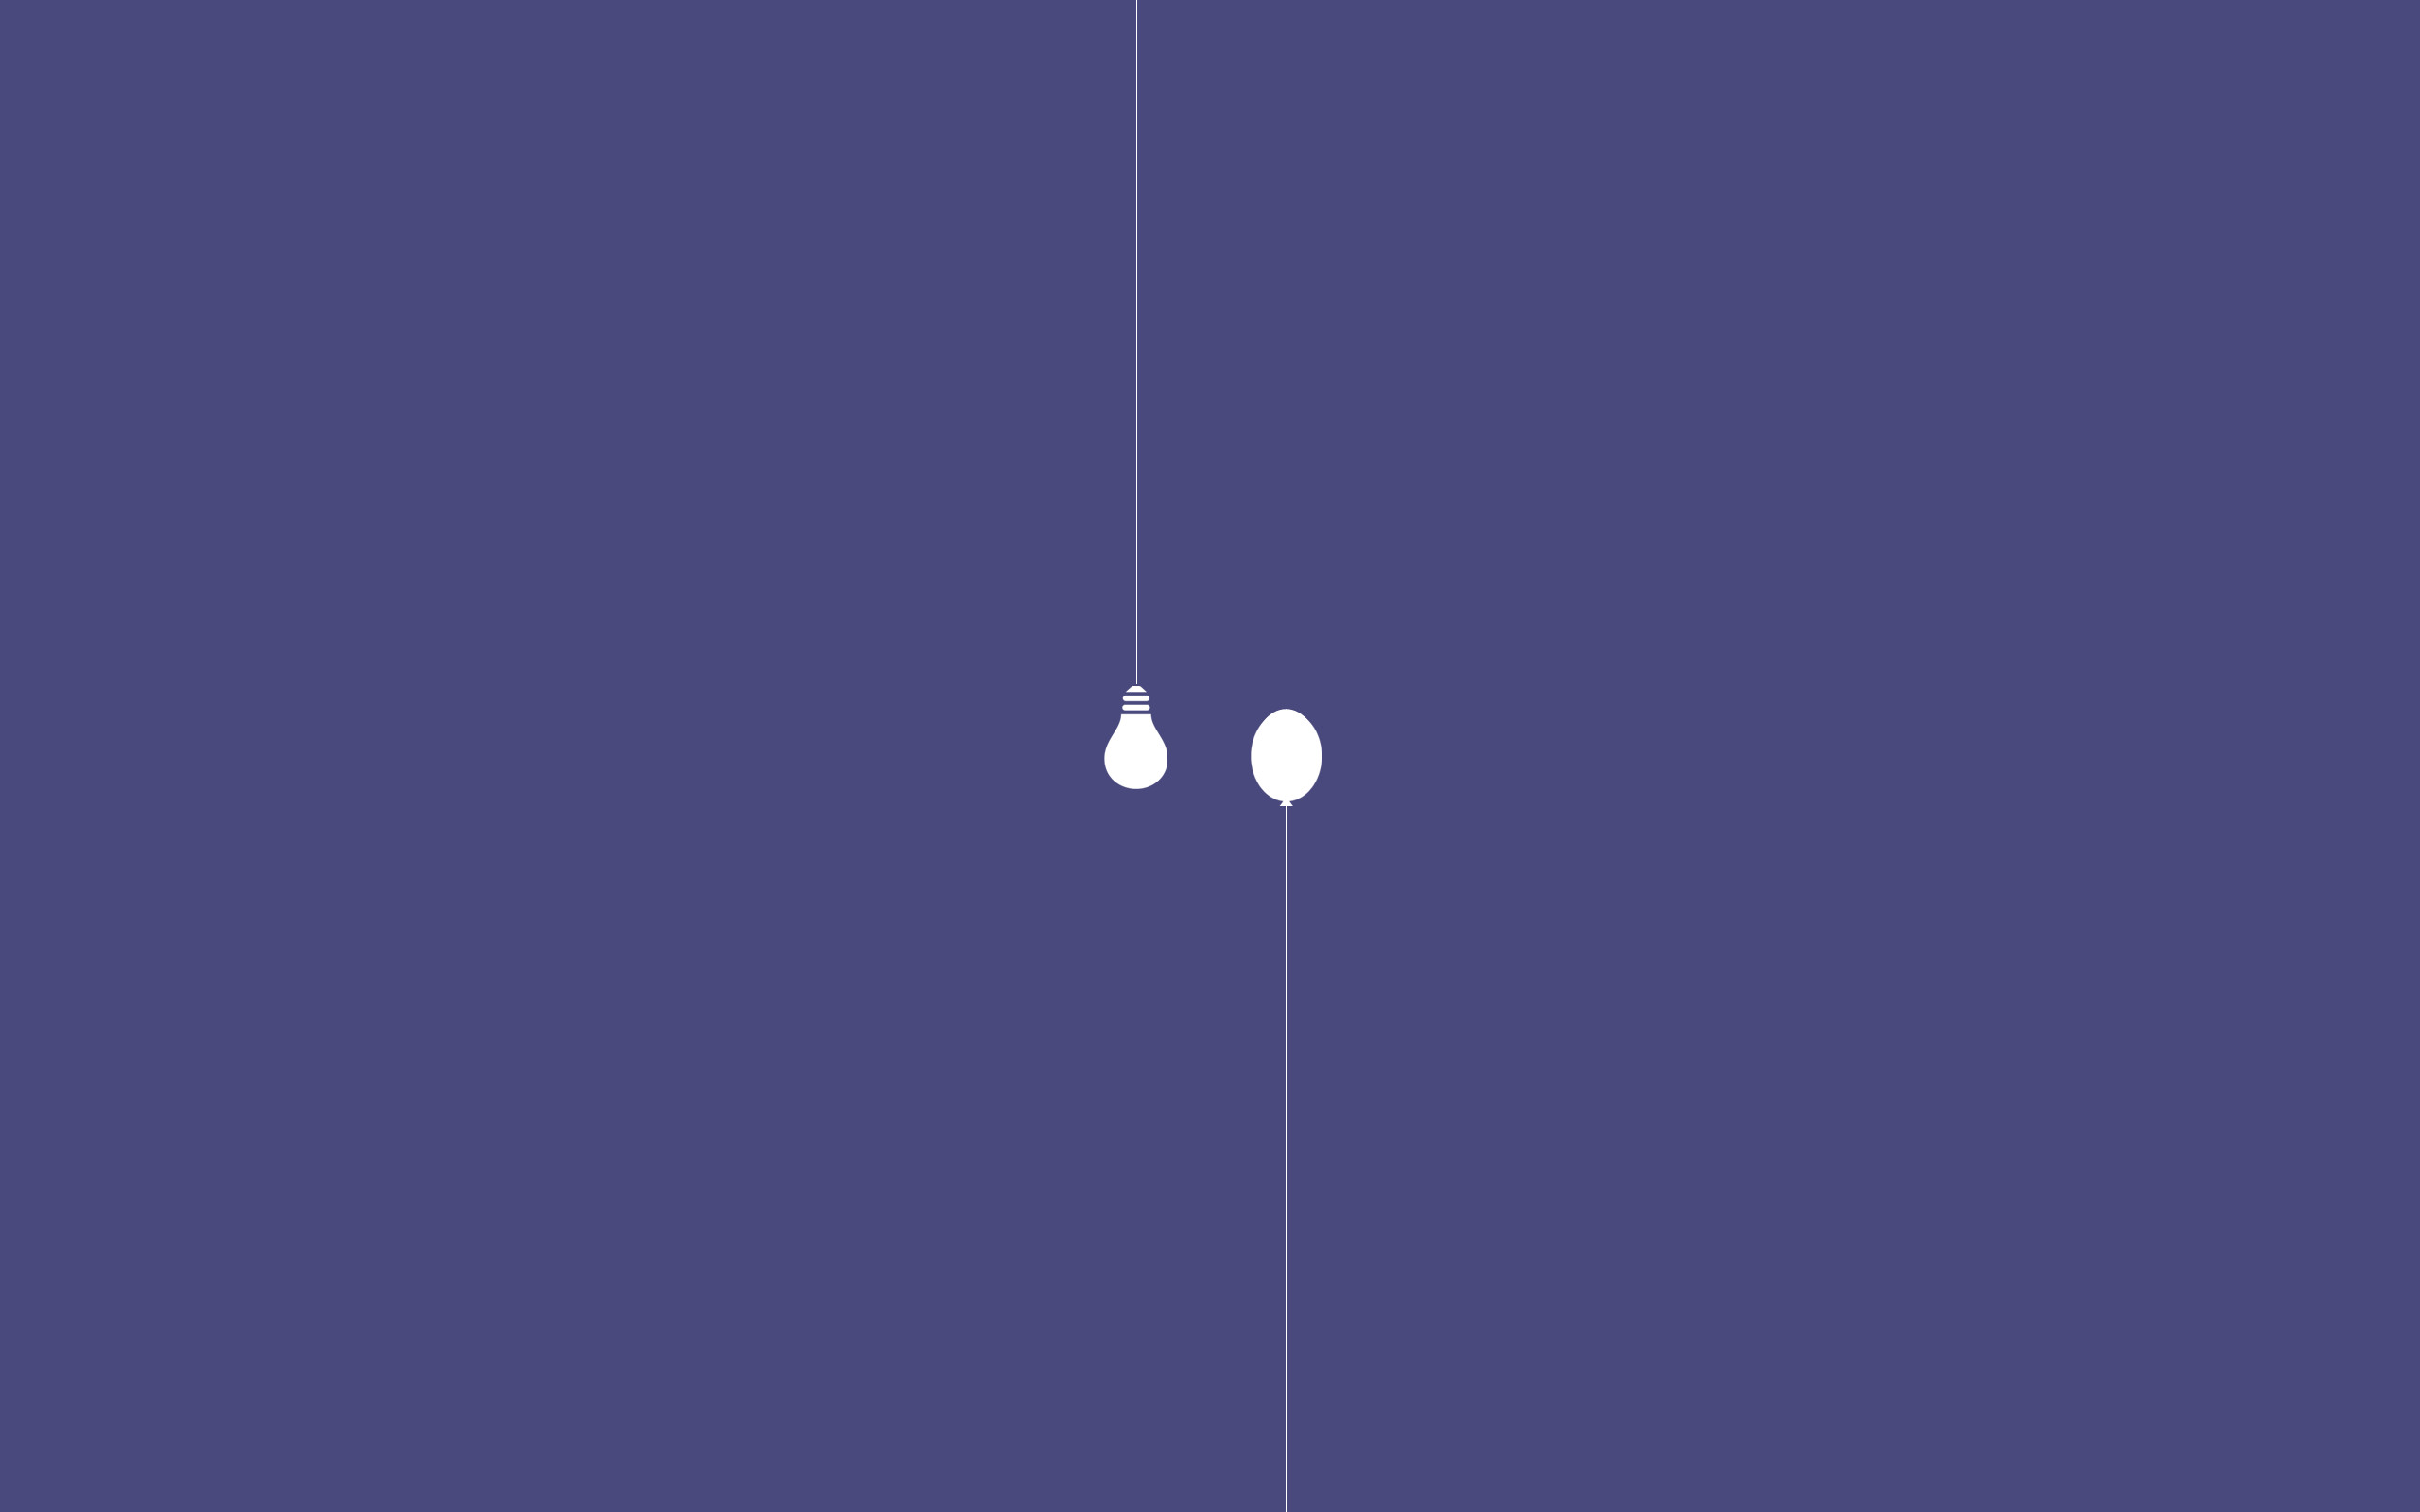 Bulb and Balloon. Found on Minimal Wallpapers